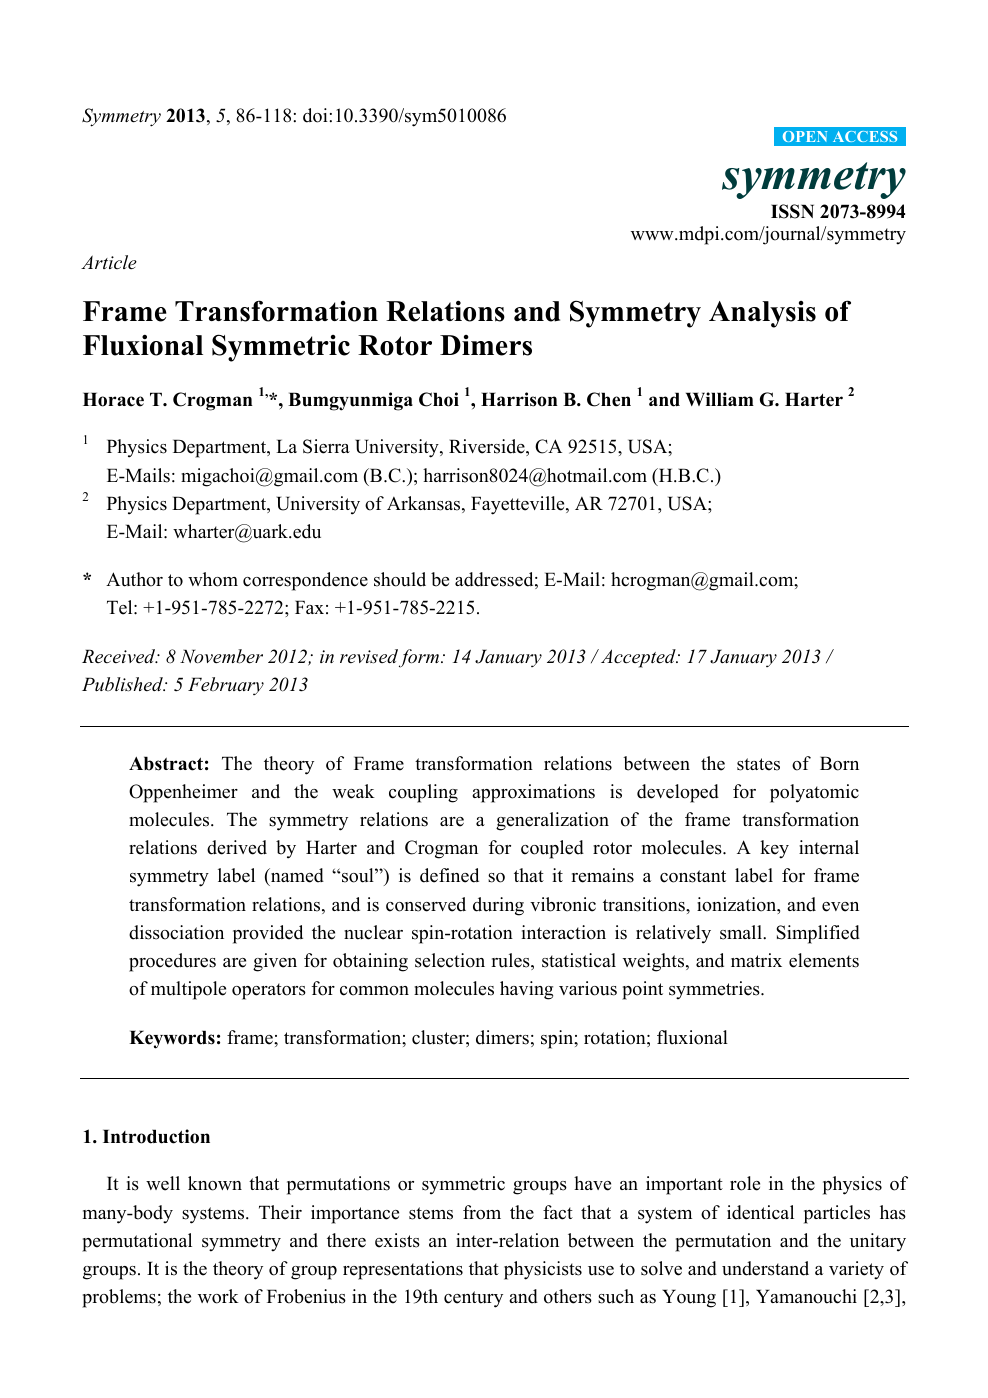 Frame Transformation Relations And Symmetry Analysis Of Fluxional Symmetric Rotor Dimers Topic Of Research Paper In Physical Sciences Download Scholarly Article Pdf And Read For Free On Cyberleninka Open Science Hub